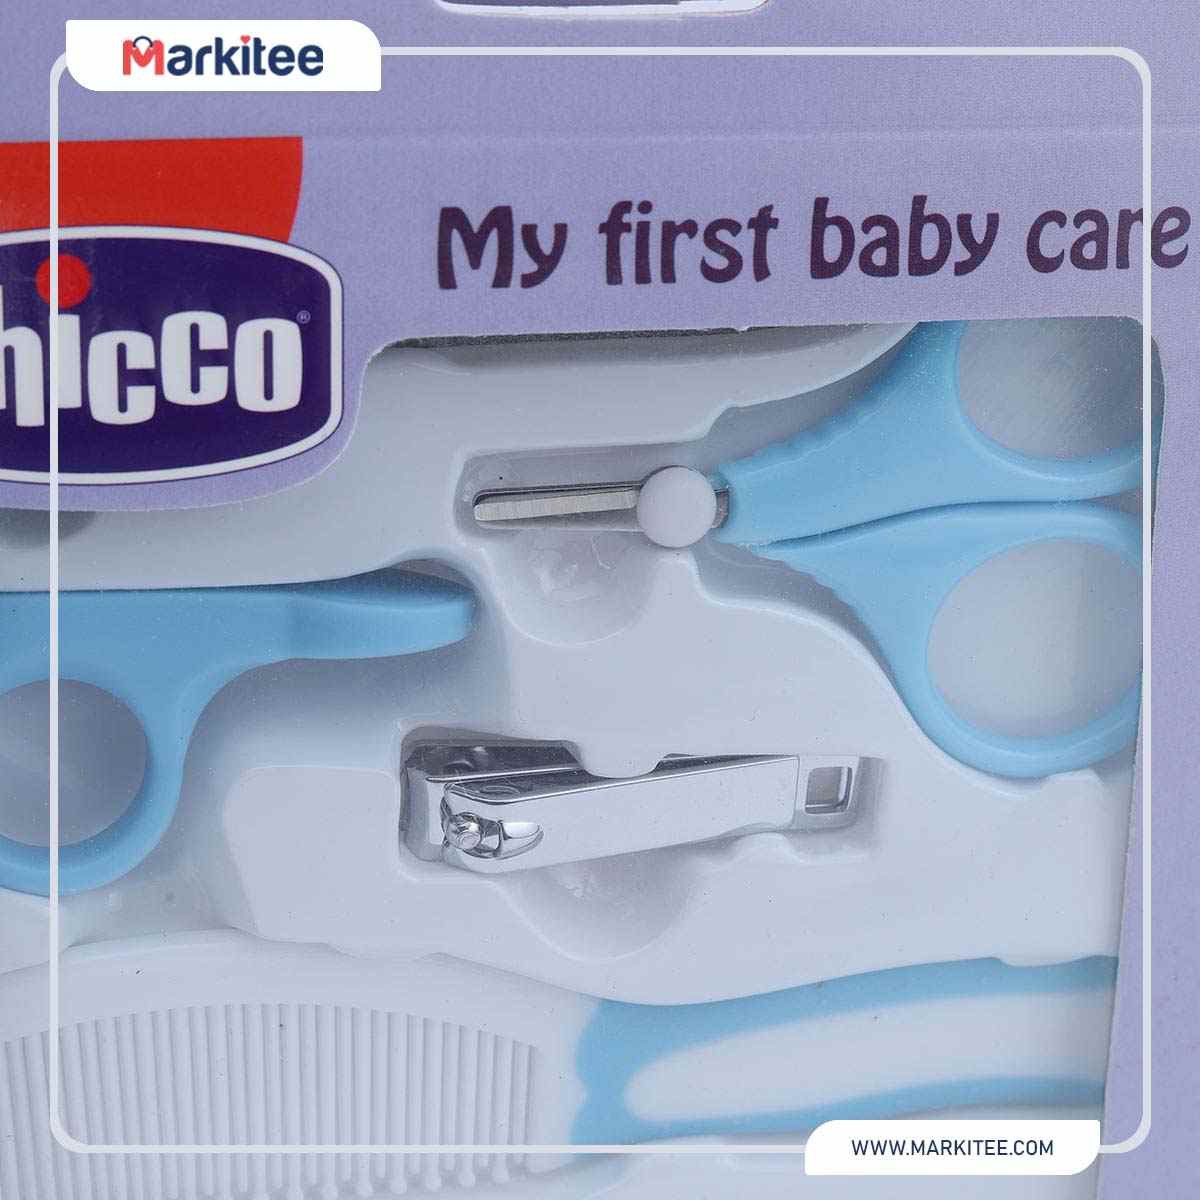 Chicco baby care set 5...-BB-M677-1